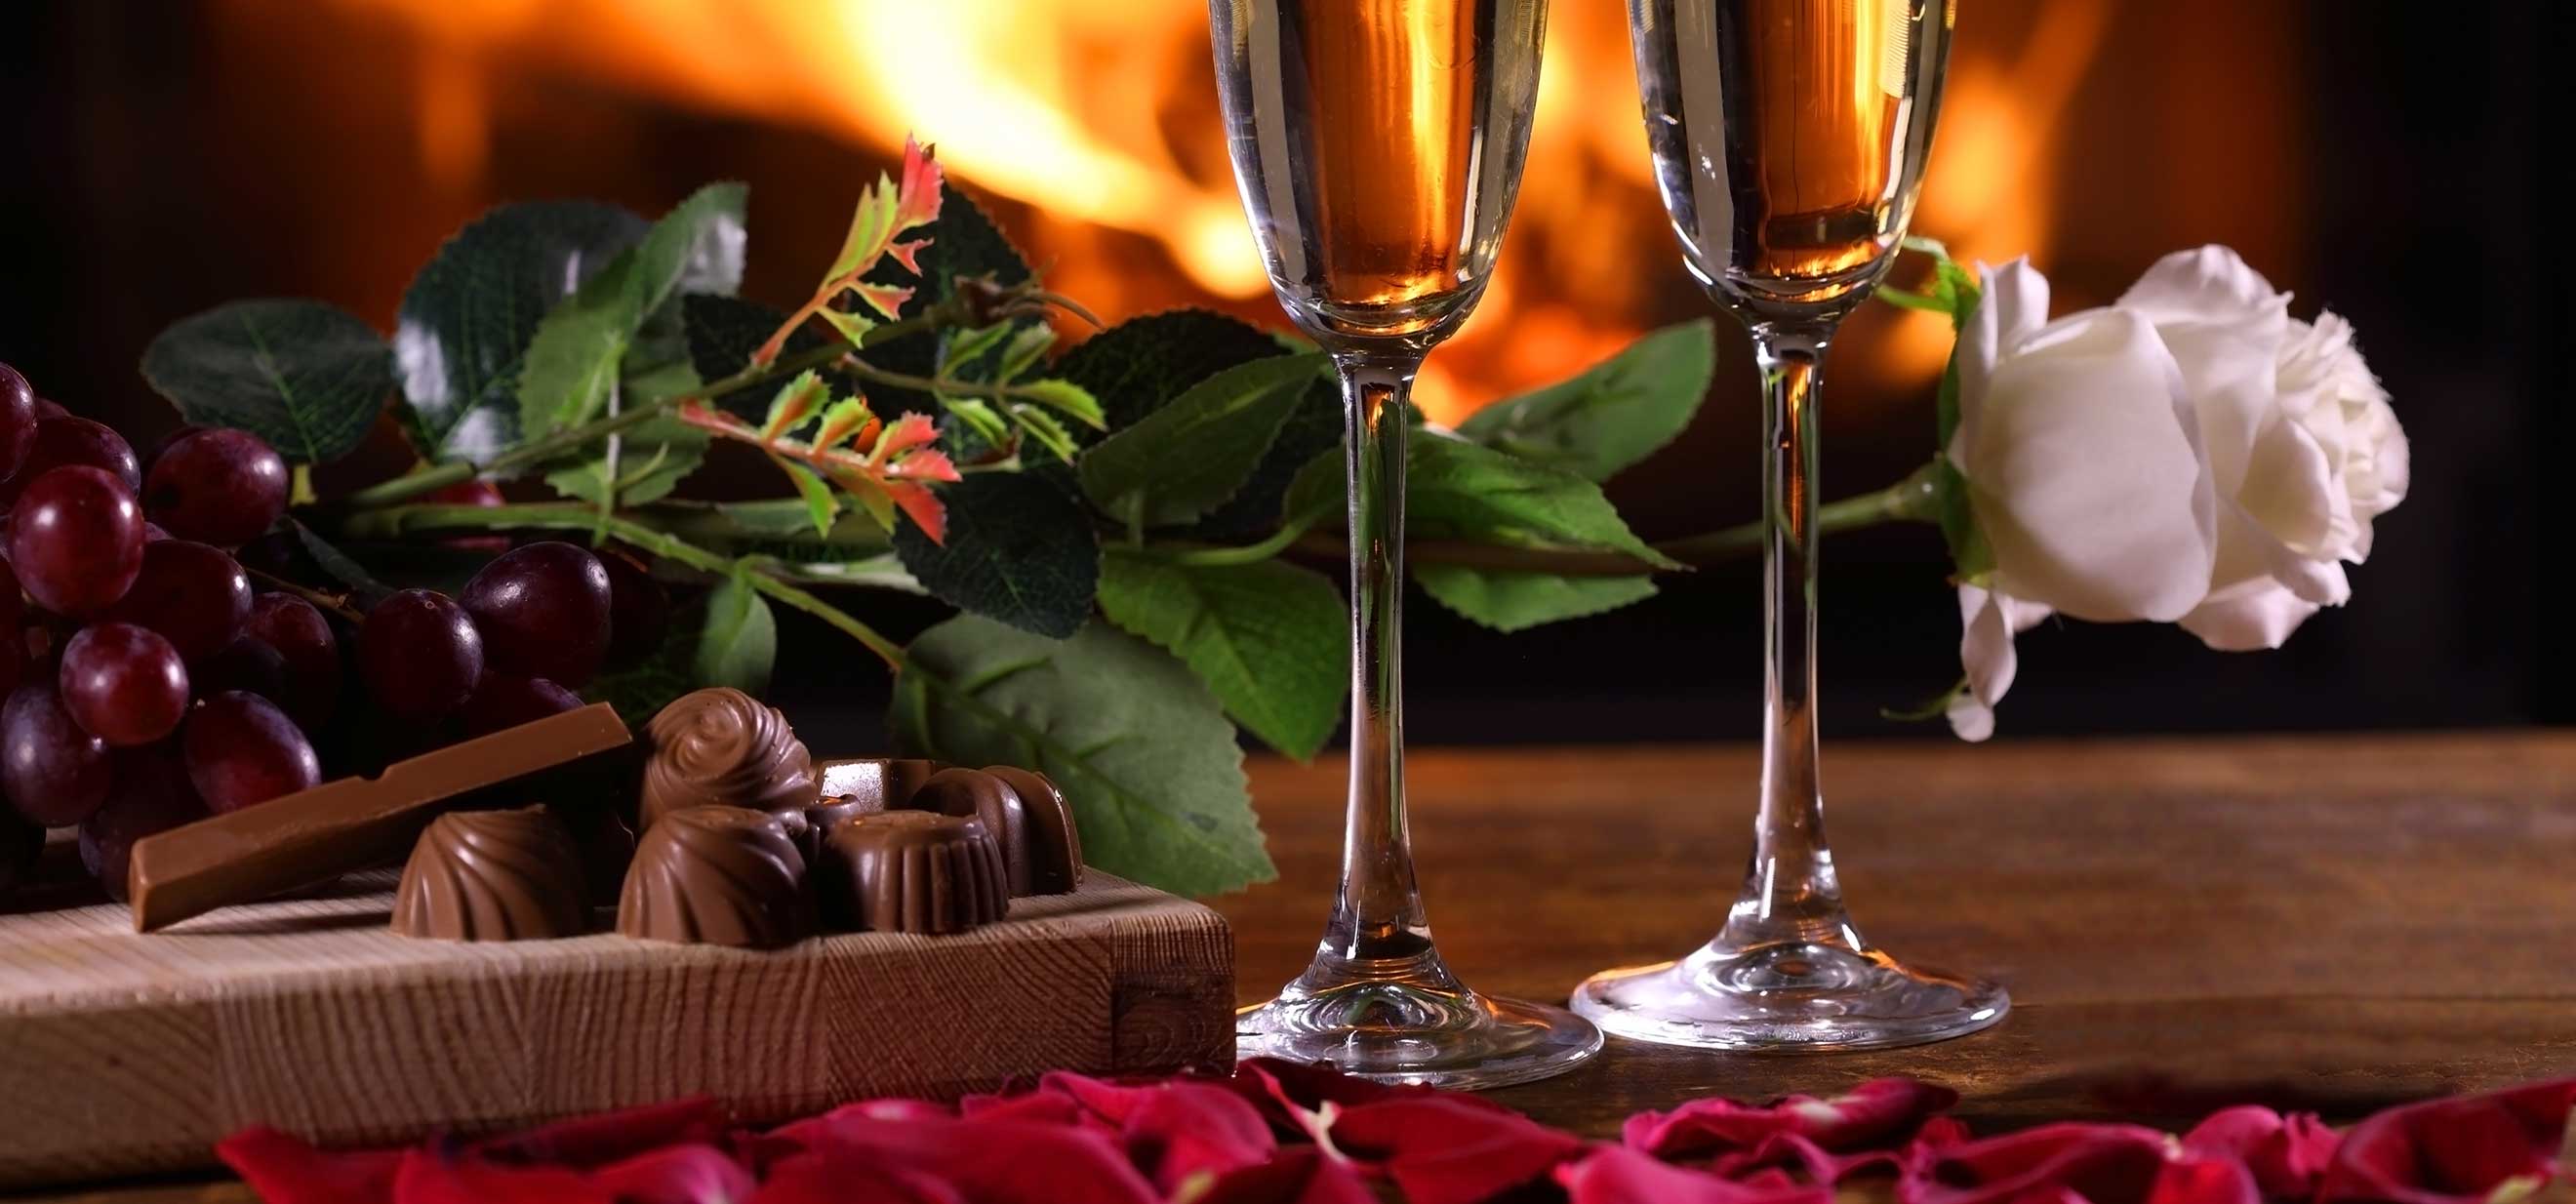 Chocolates, Champagne and roses in front of a fireplace